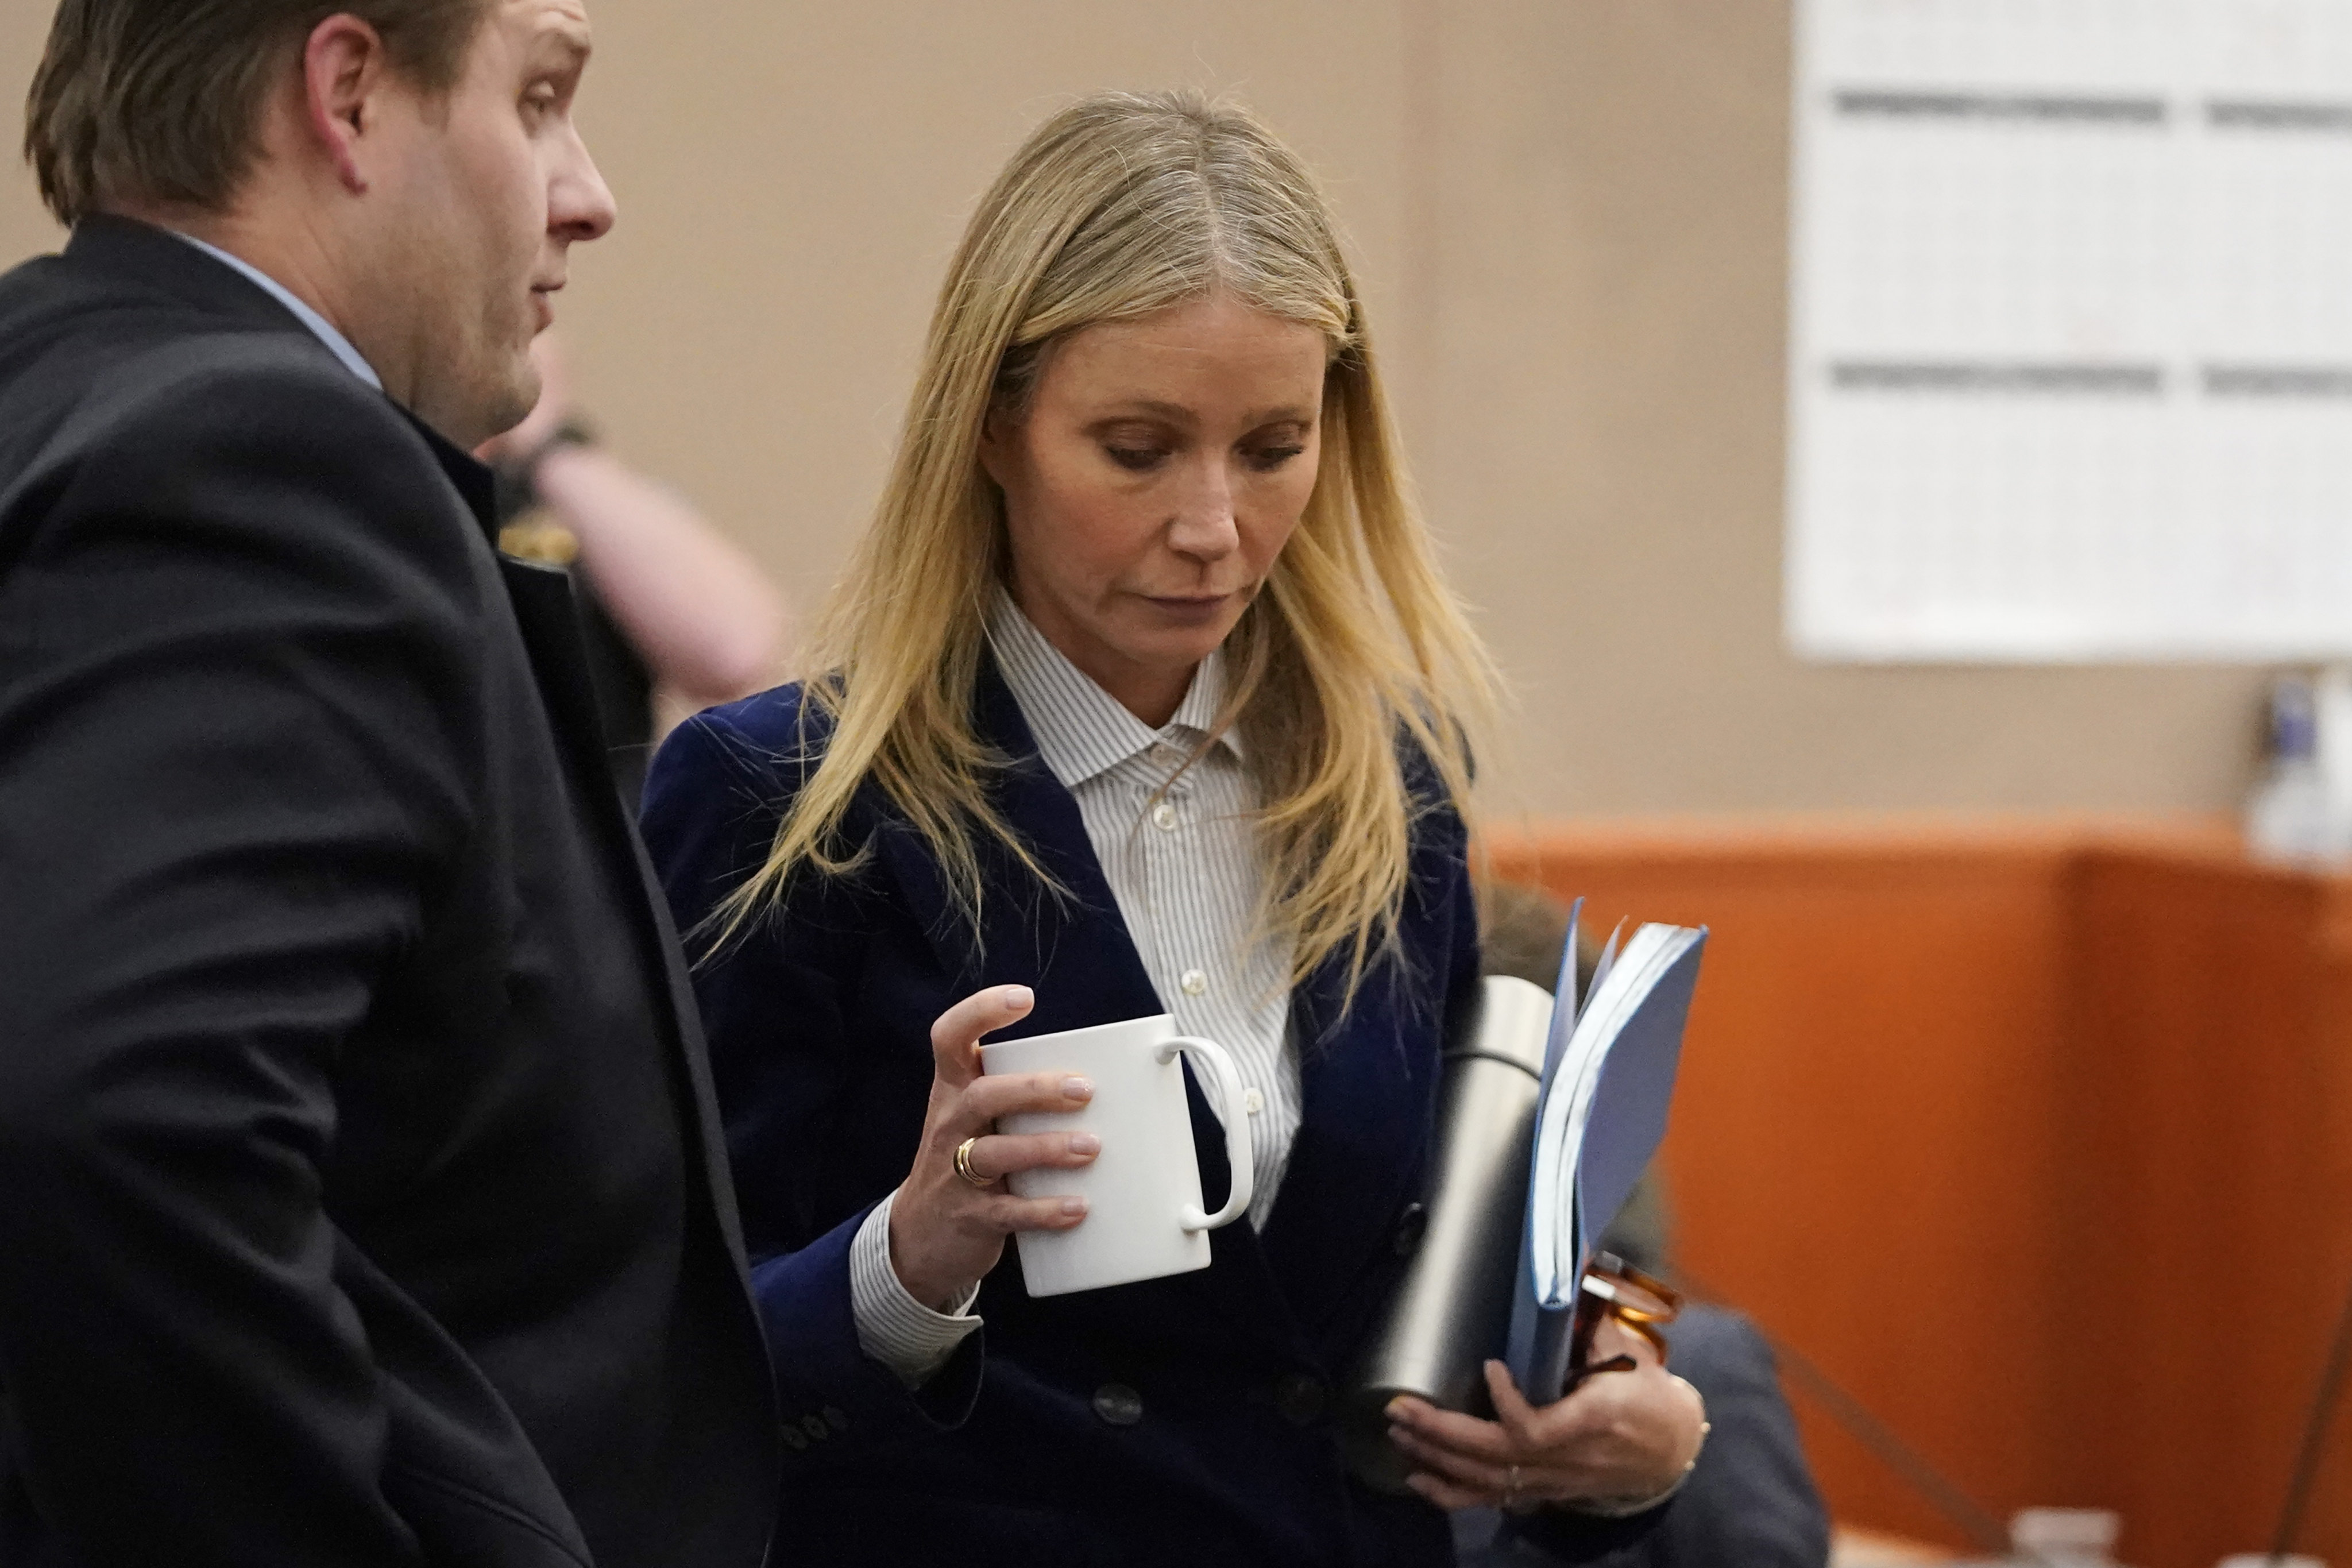 Gwyneth Paltrow leaves the courtroom during a lunch break in her trial on Thursday. Photo: AP